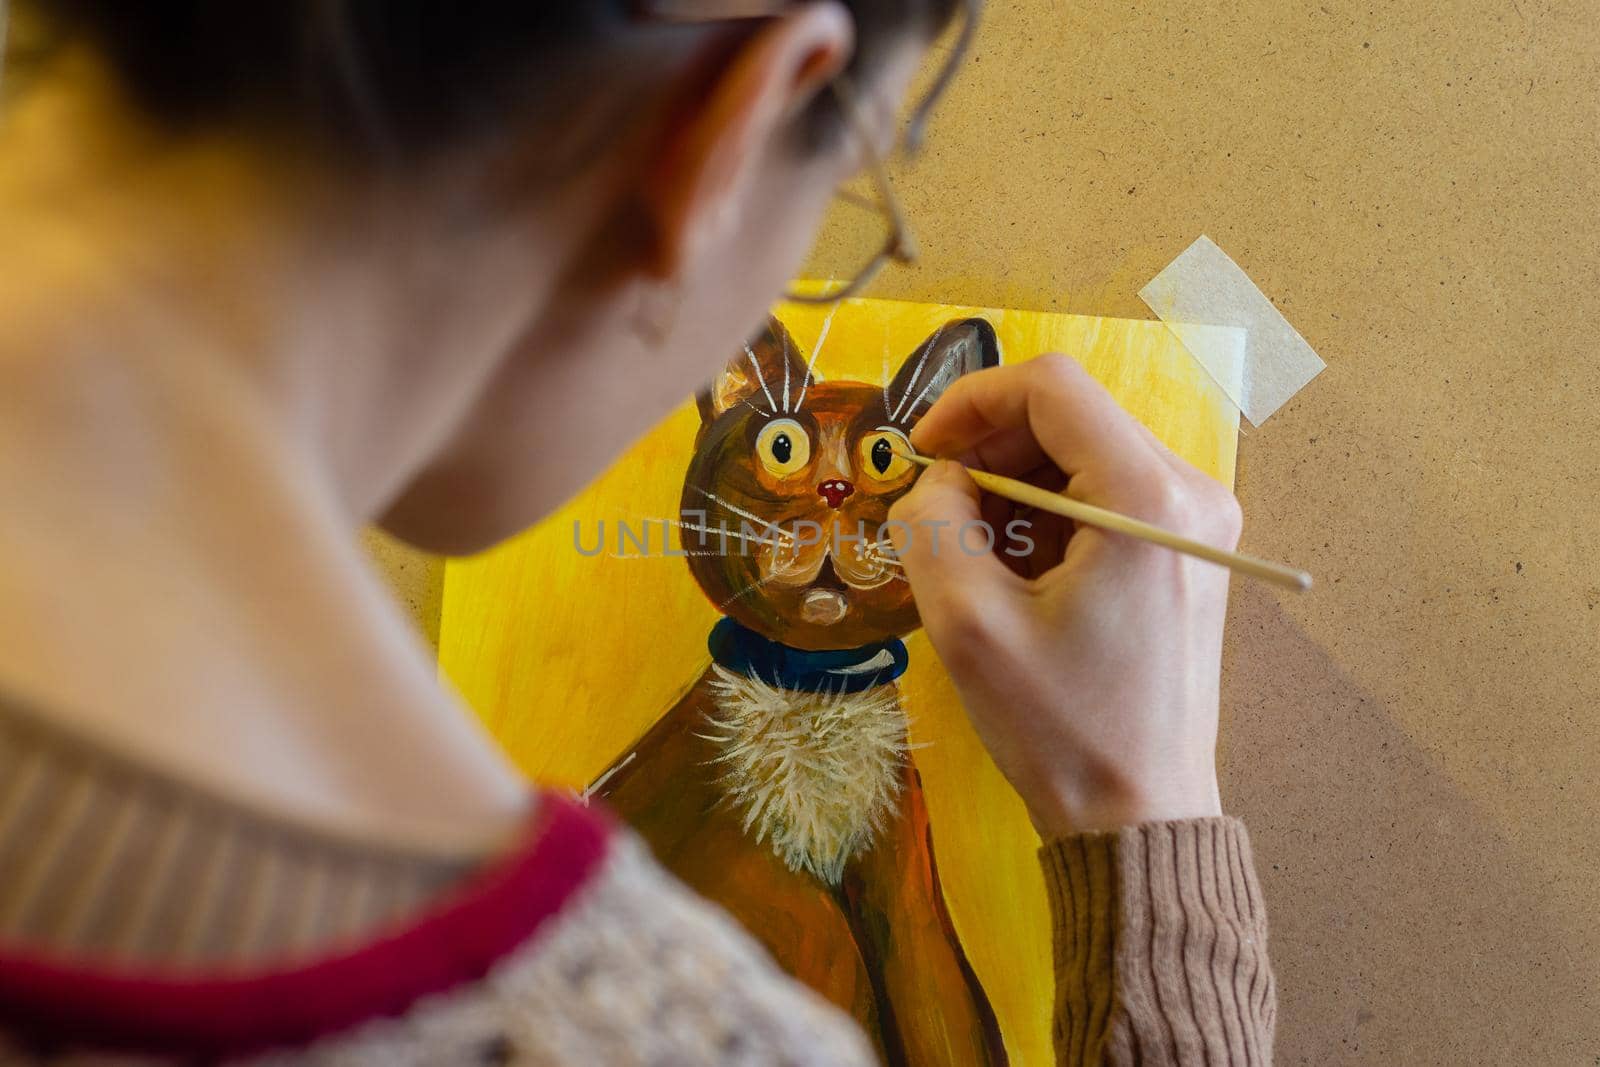 The artist paints a drawing of a cat on an easel with acrylic paints, a view from the artist's back by Madhourse